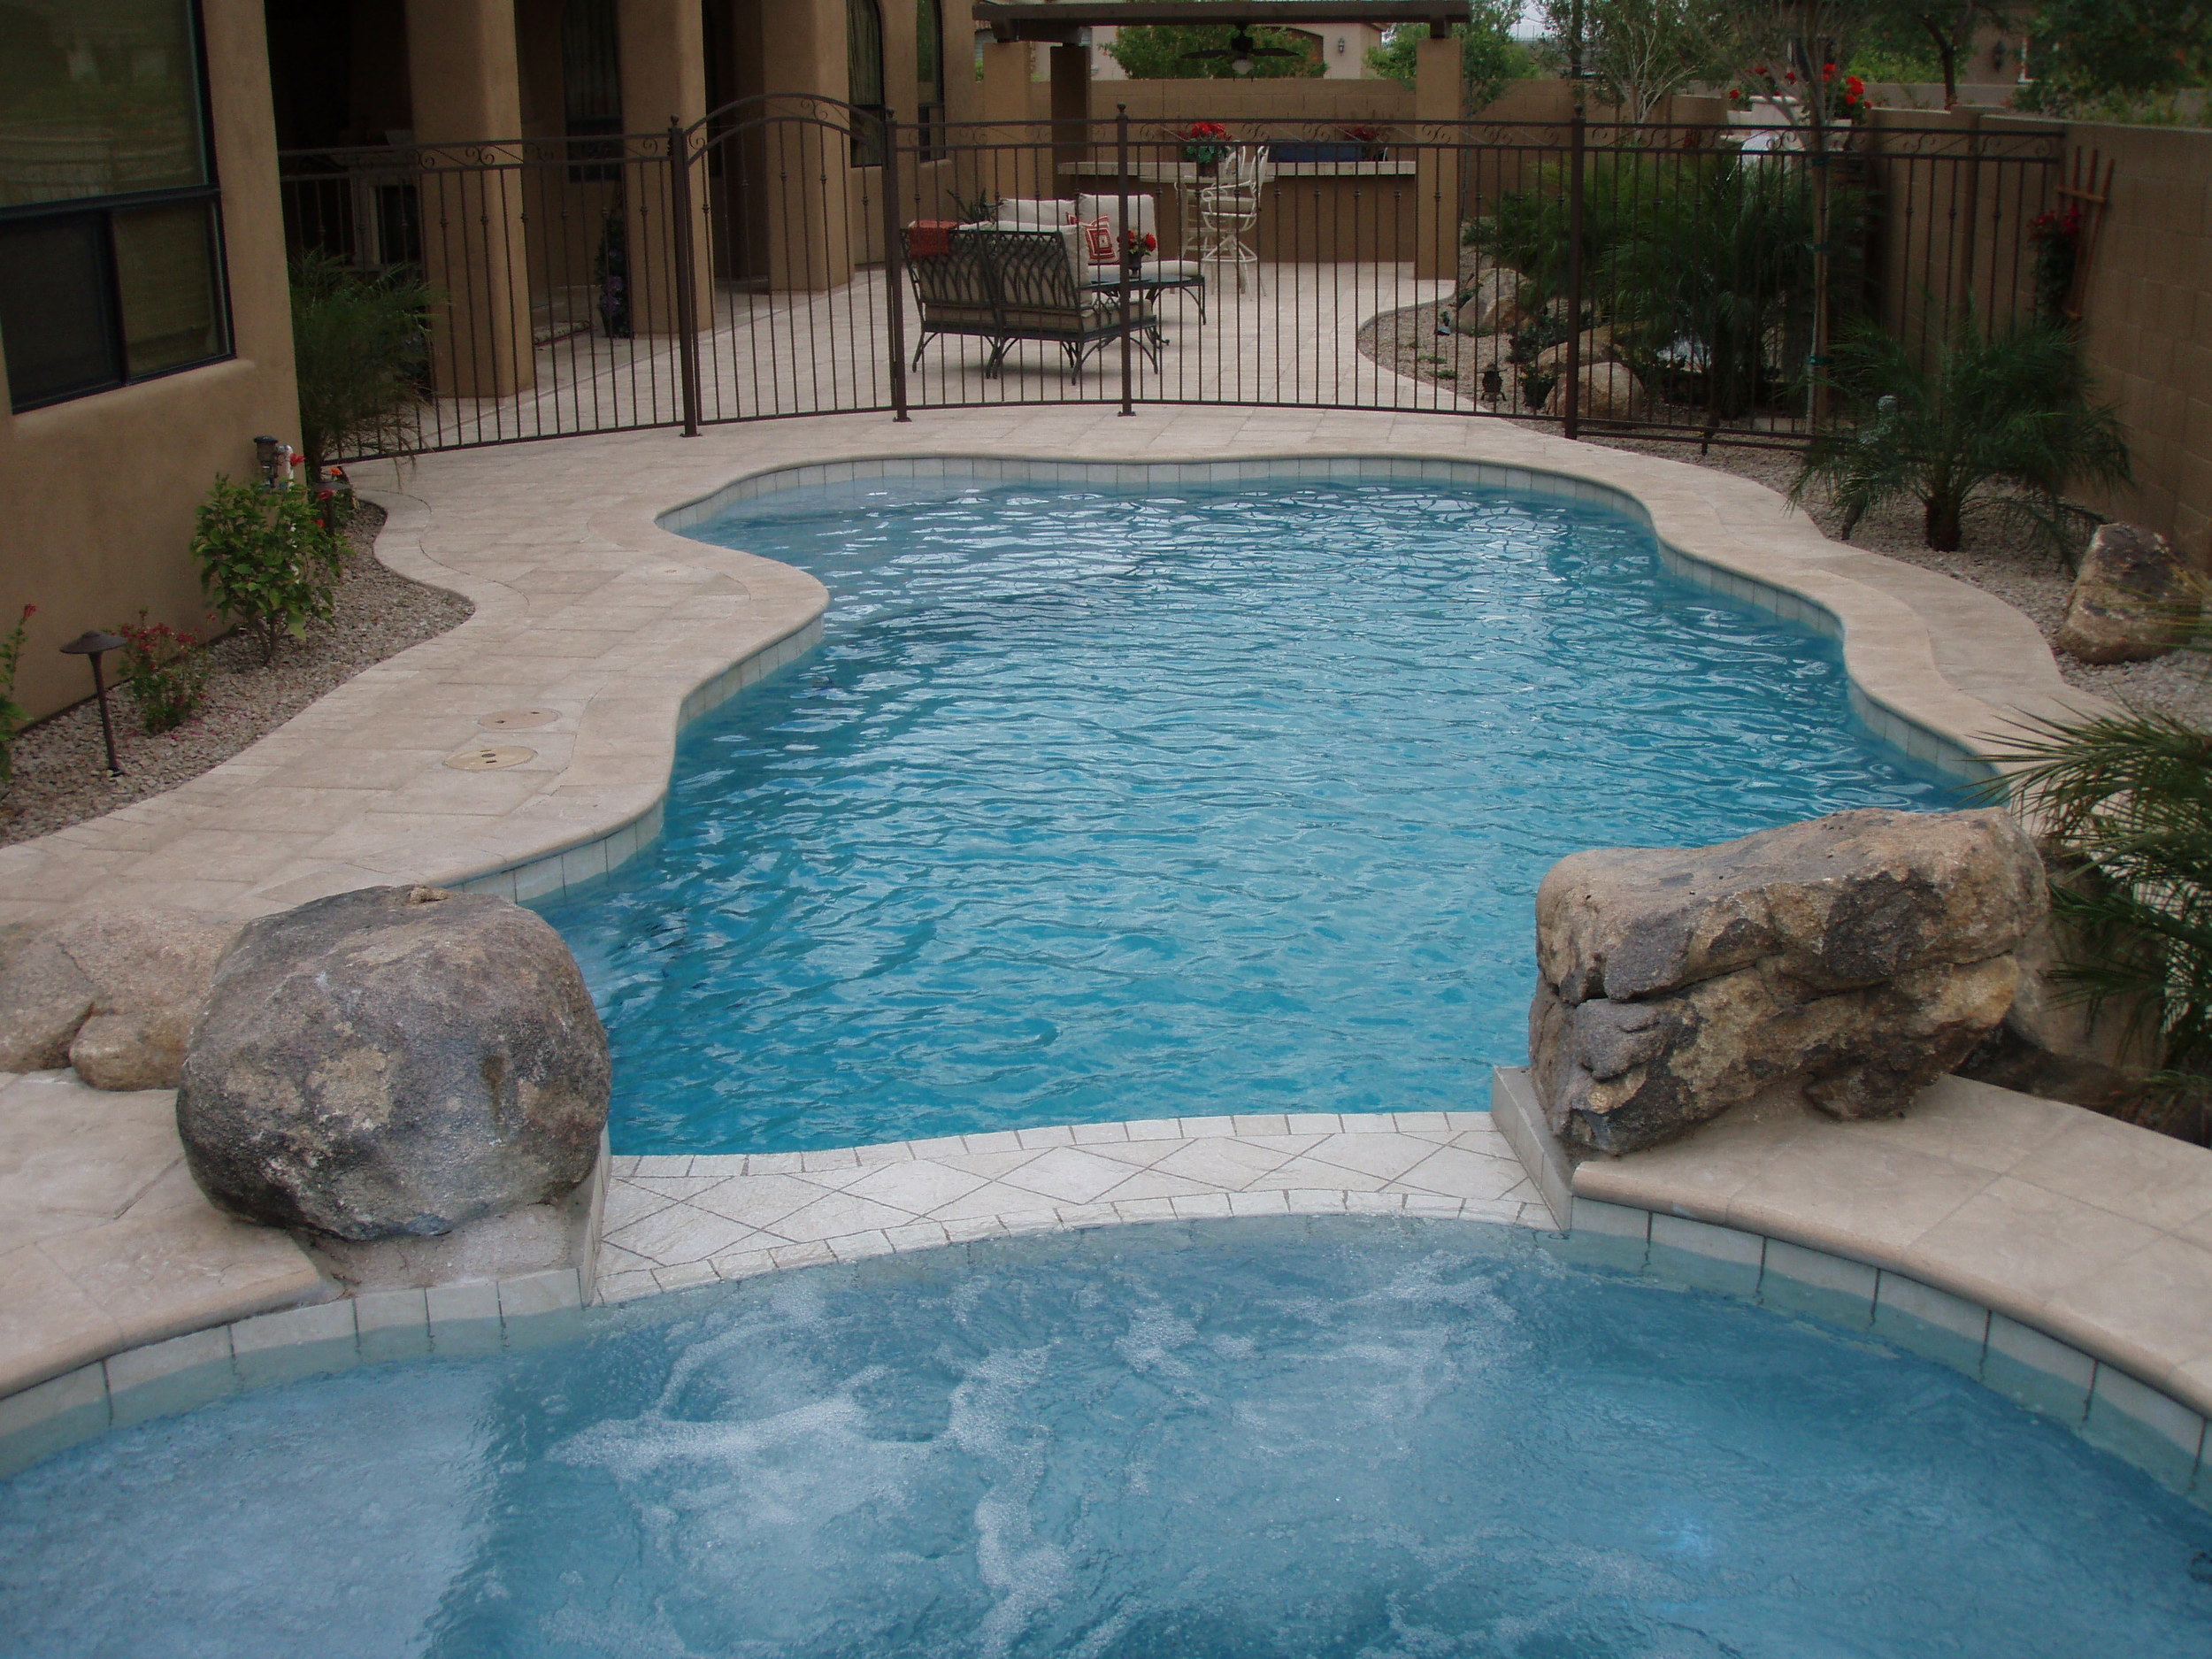 FIVE QUESTIONS TO ASK YOUR POOL DESIGNER IN PHOENIX